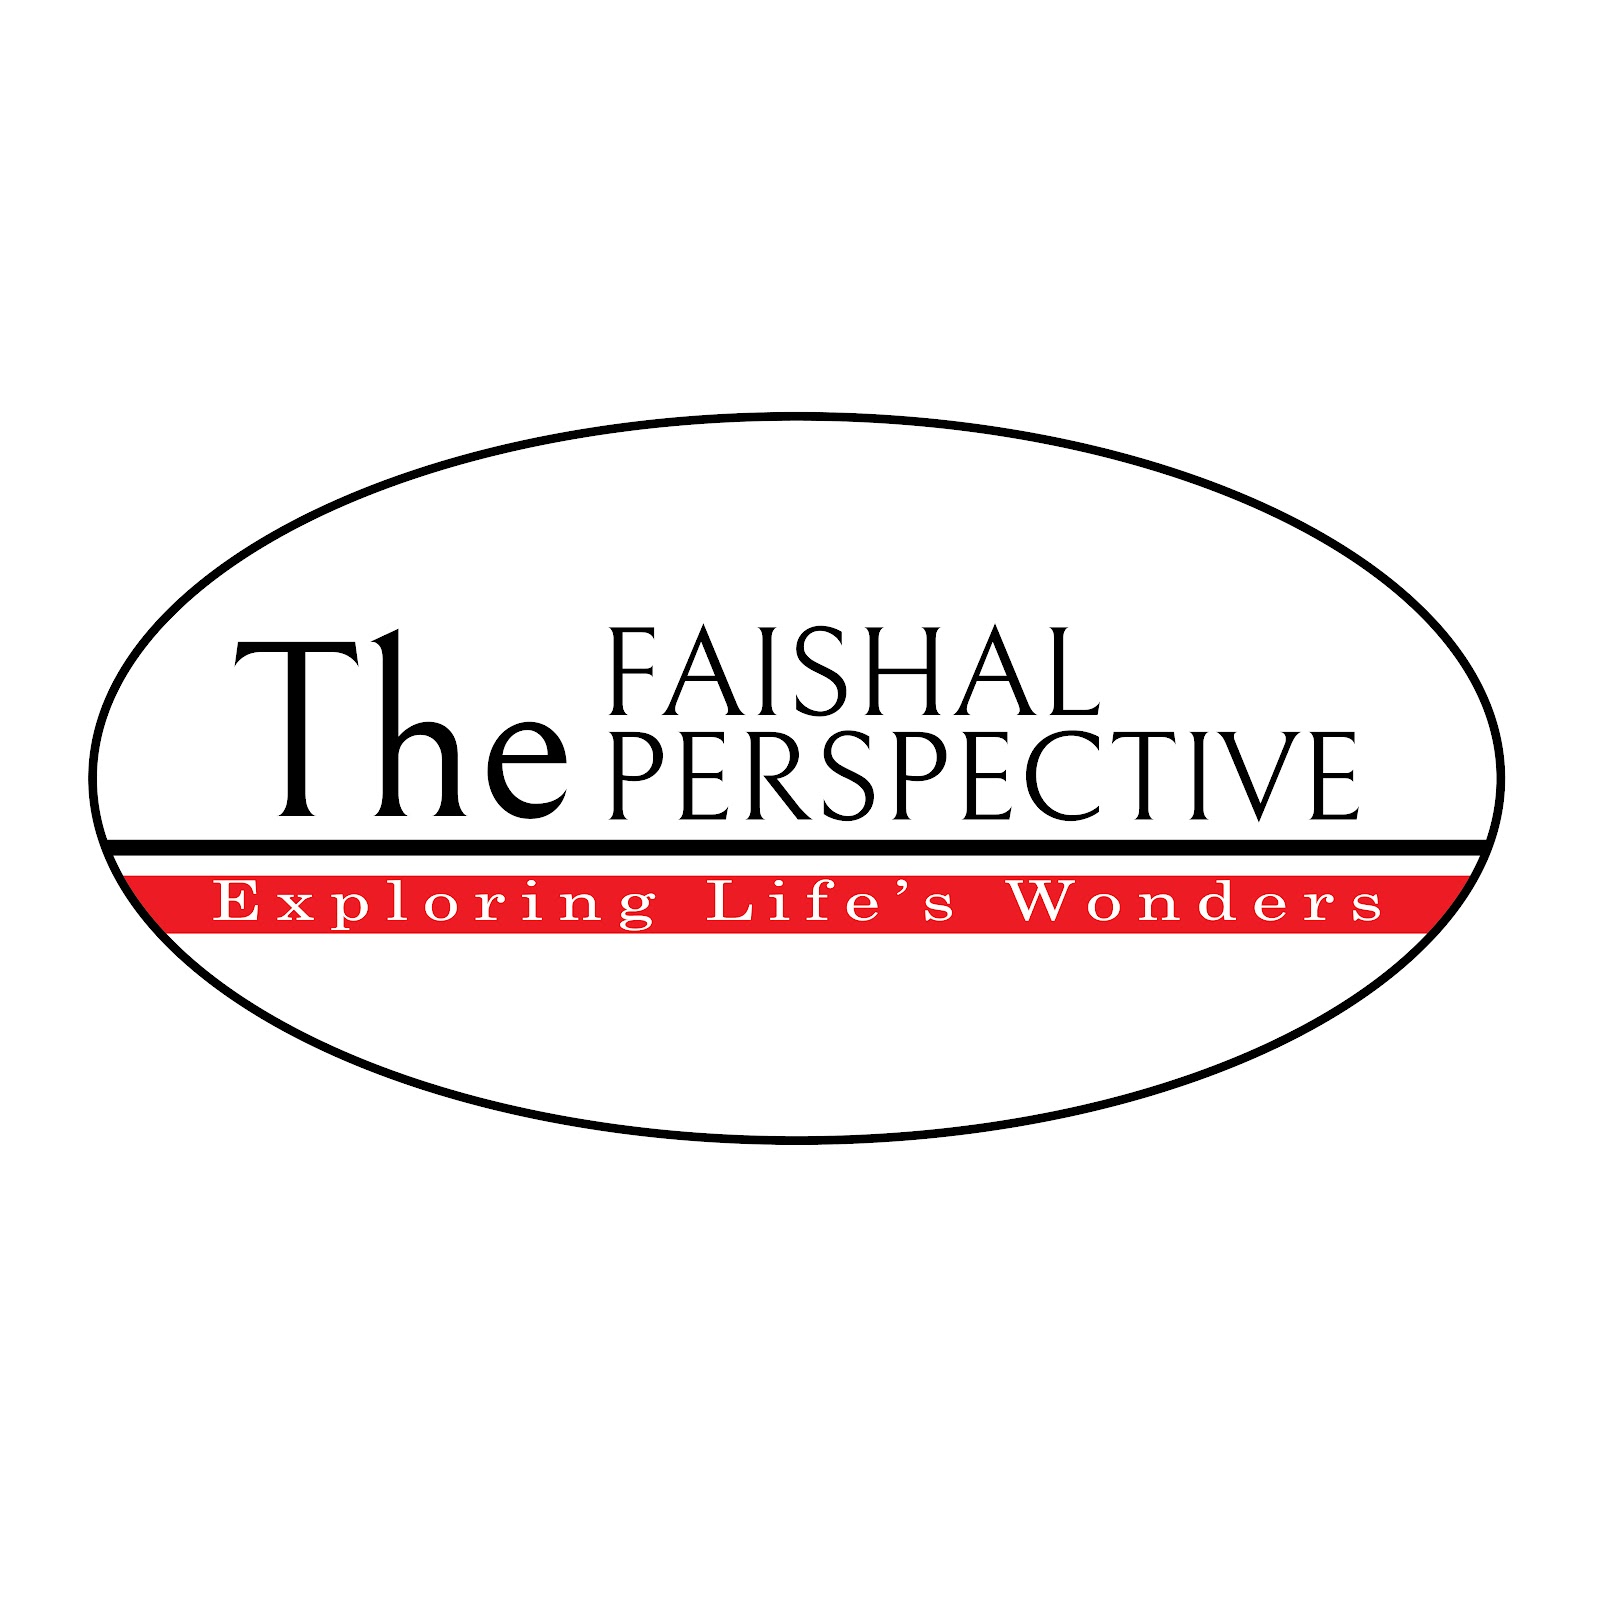 The Faishal Perspective